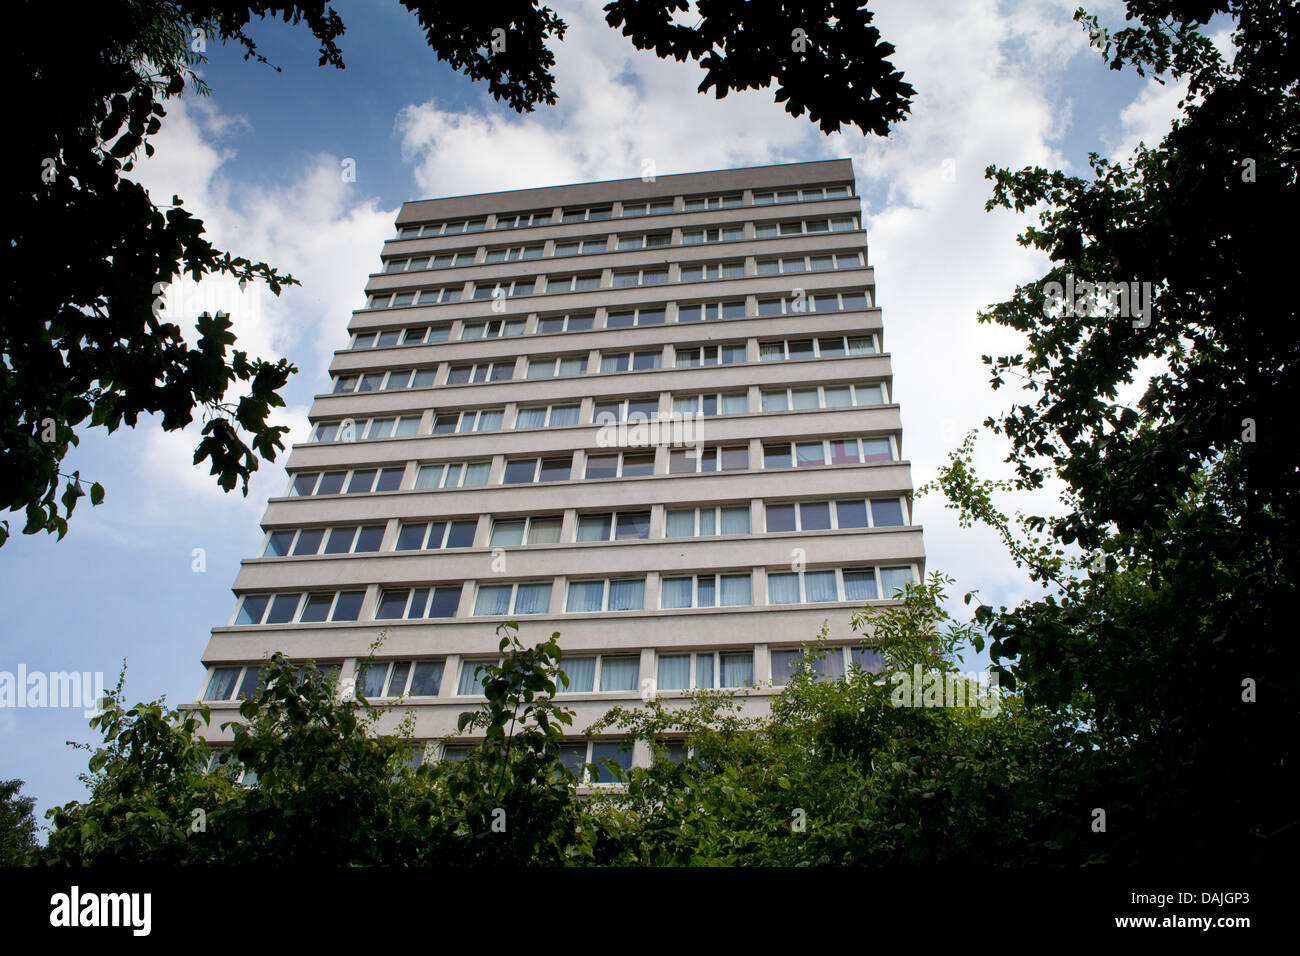 High-rise Lincoln Court estate, in North London, Bethune Road, Stoke Newington / Stamford Hill in London Borough of Hackney, 2013 Stock Photo